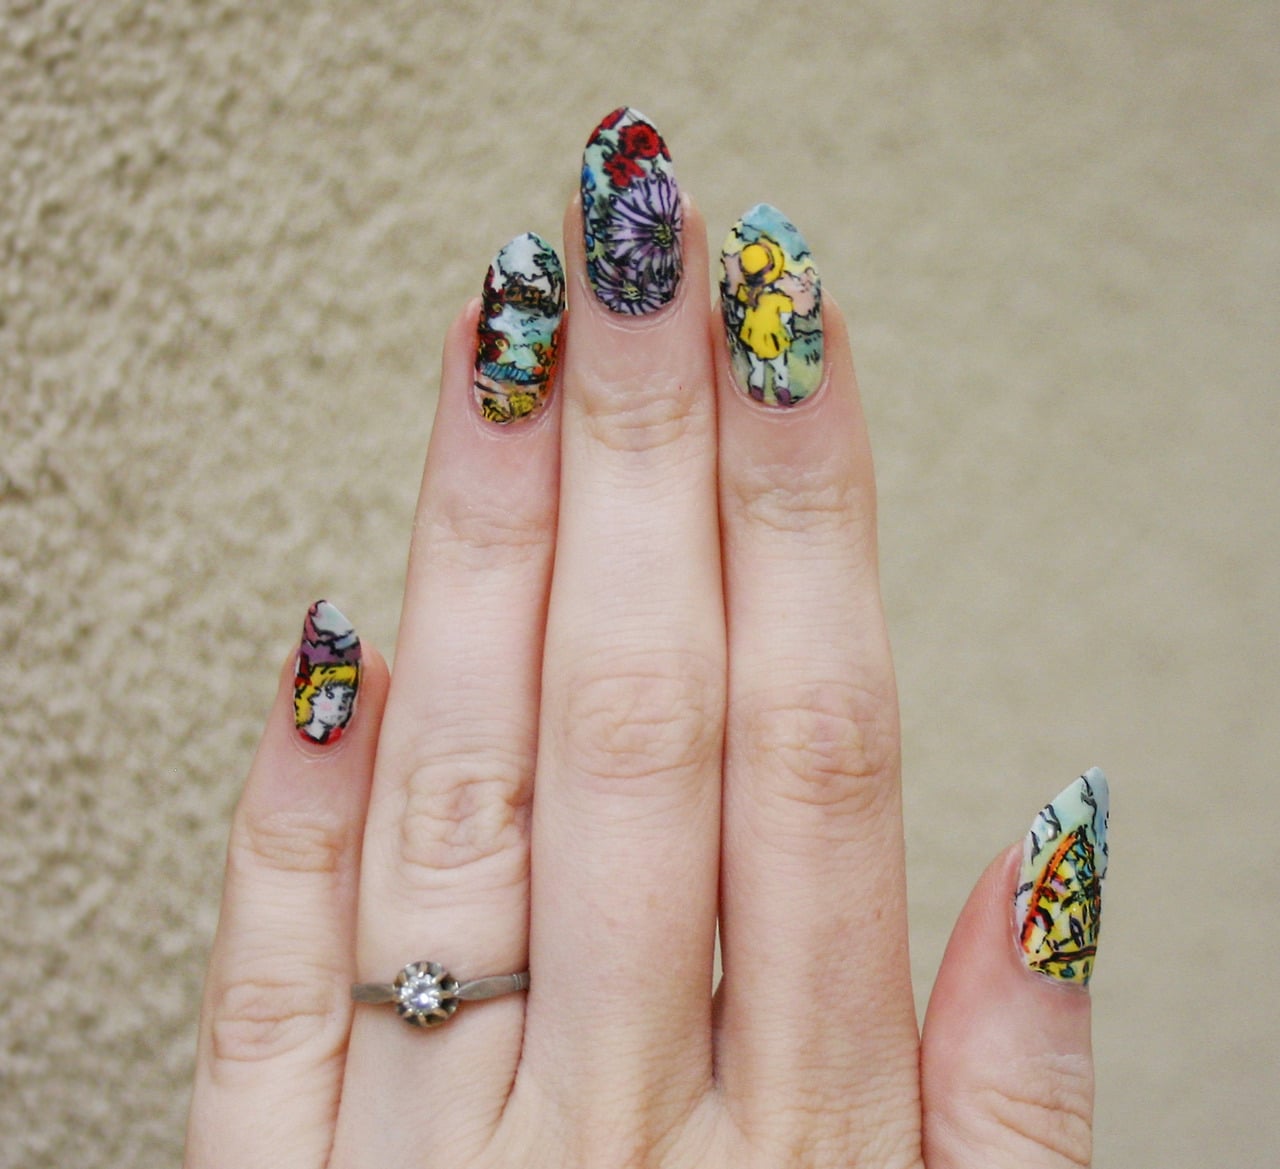 31 Day Nail Challenge--Day 25: Inspired by Fashion